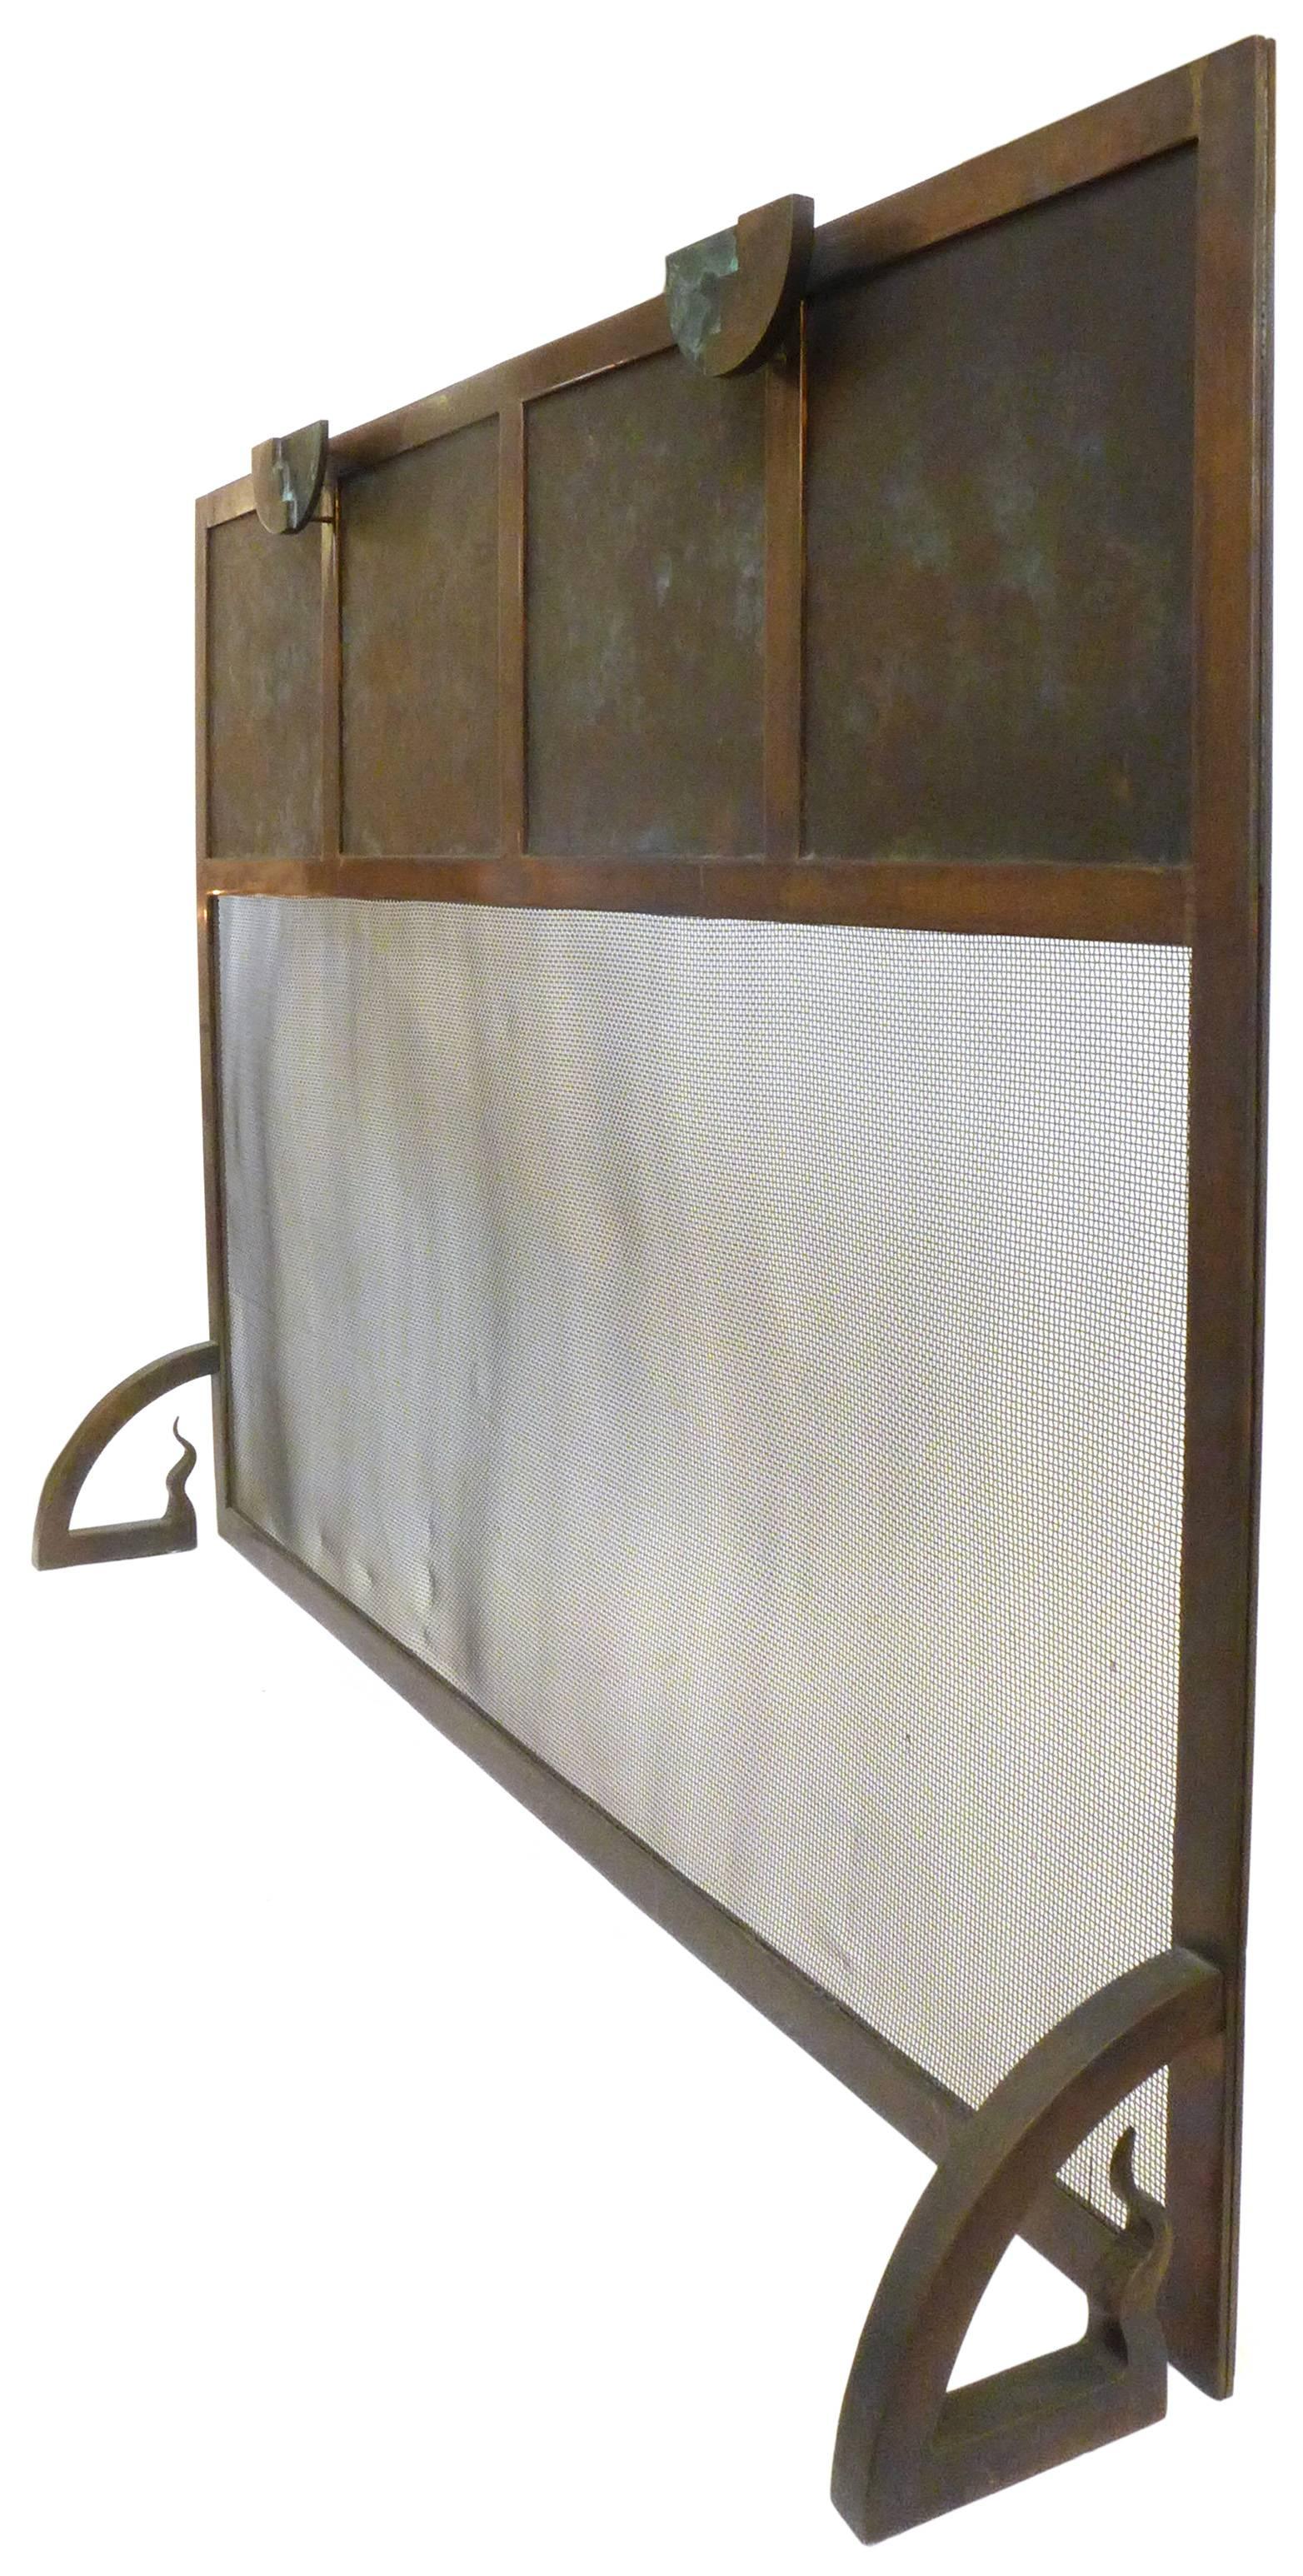 A fantastic Machine Age inspired bronze fire screen. A remarkable piece of great presence and subtle detail with demilune, stair-step handles and stylized 